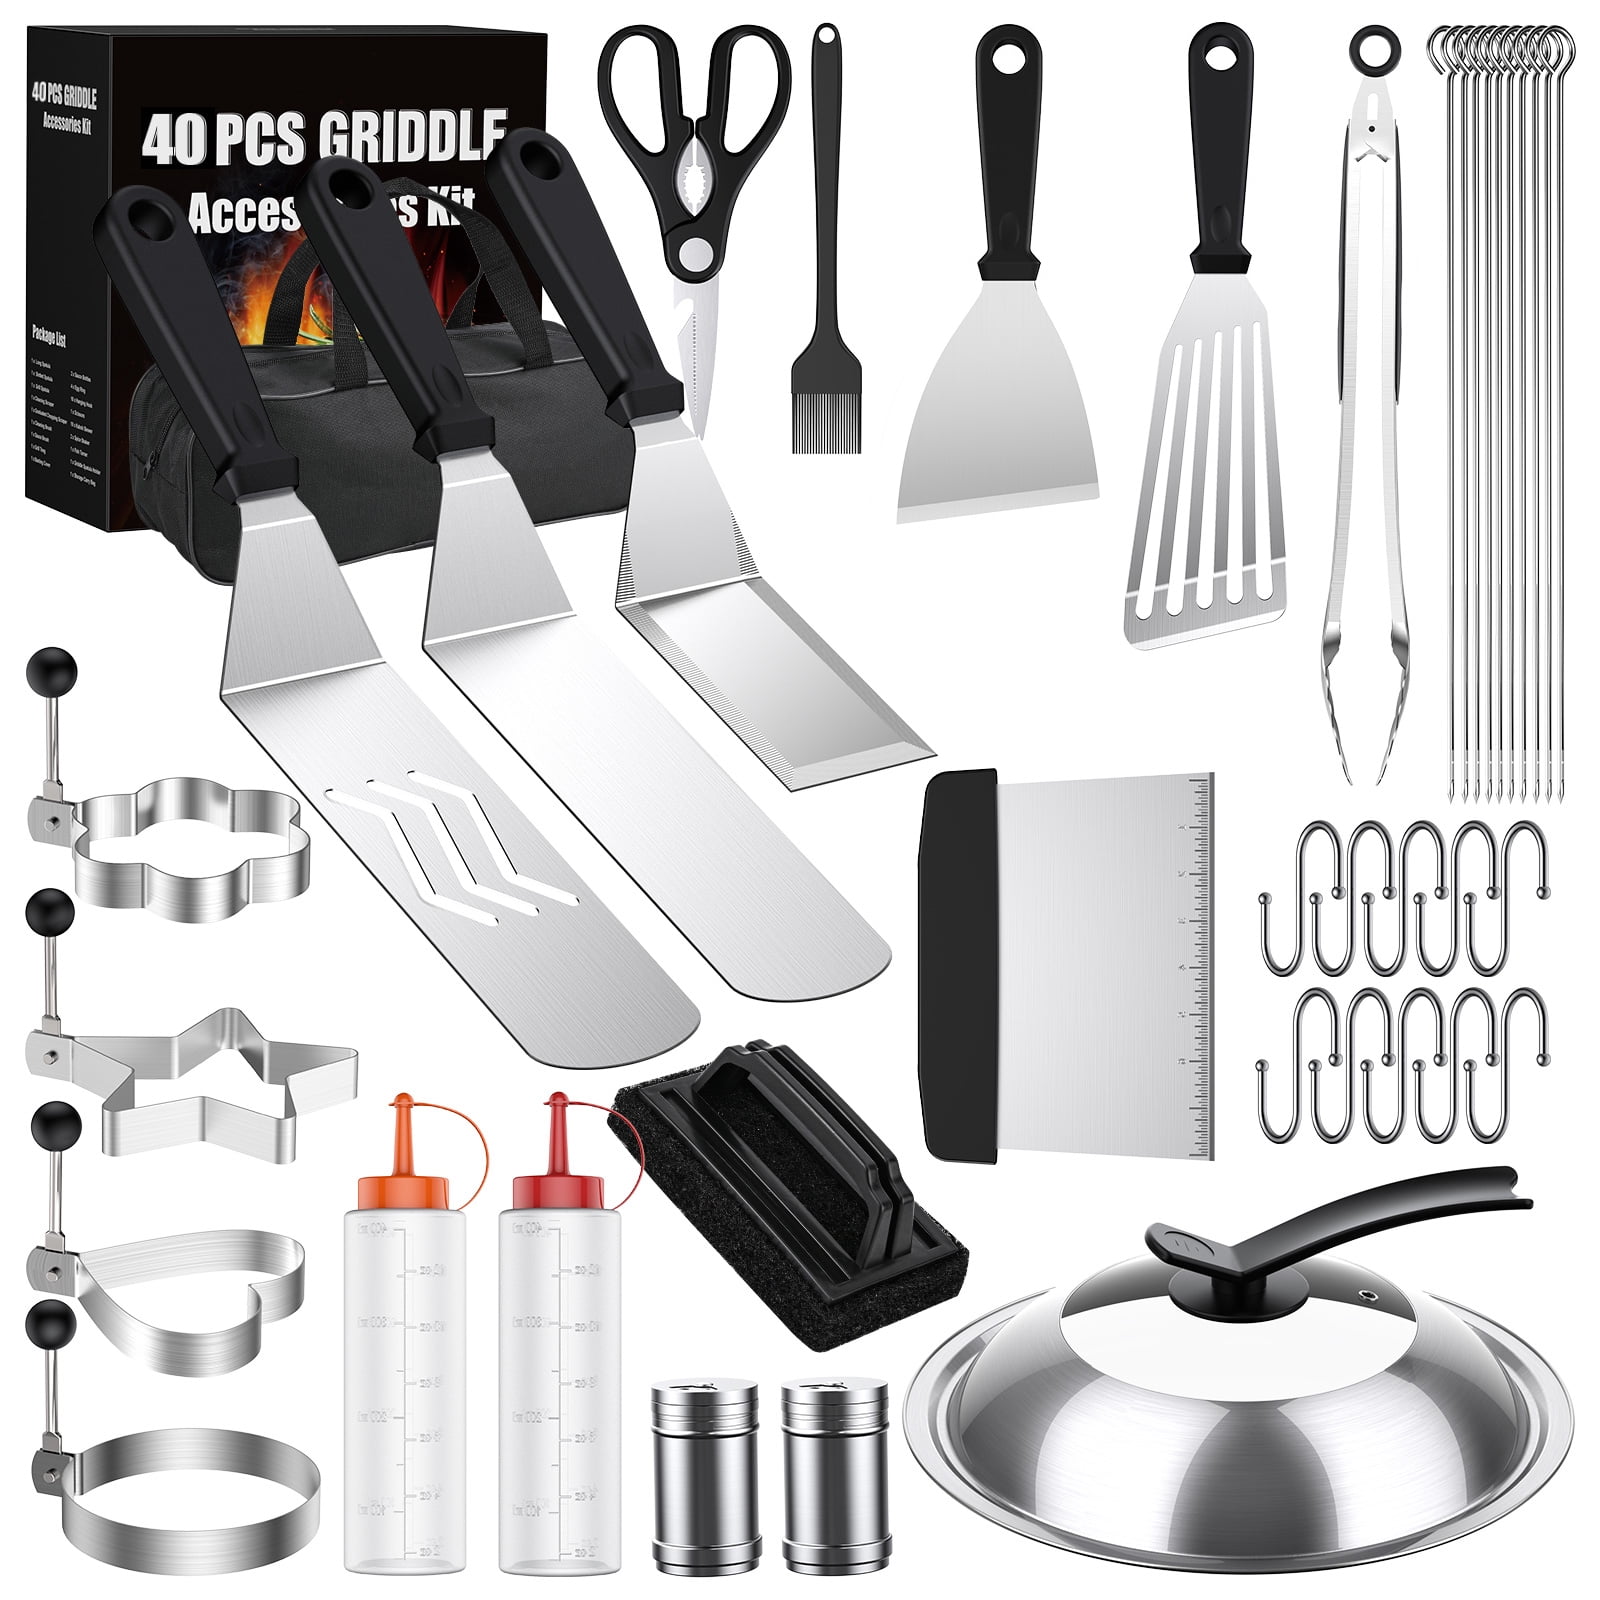 EWFEN Griddle Accessories Kit, 29PCS Flat Top Grill Accessories Set for  Blackstone and Camp Chef, Grill